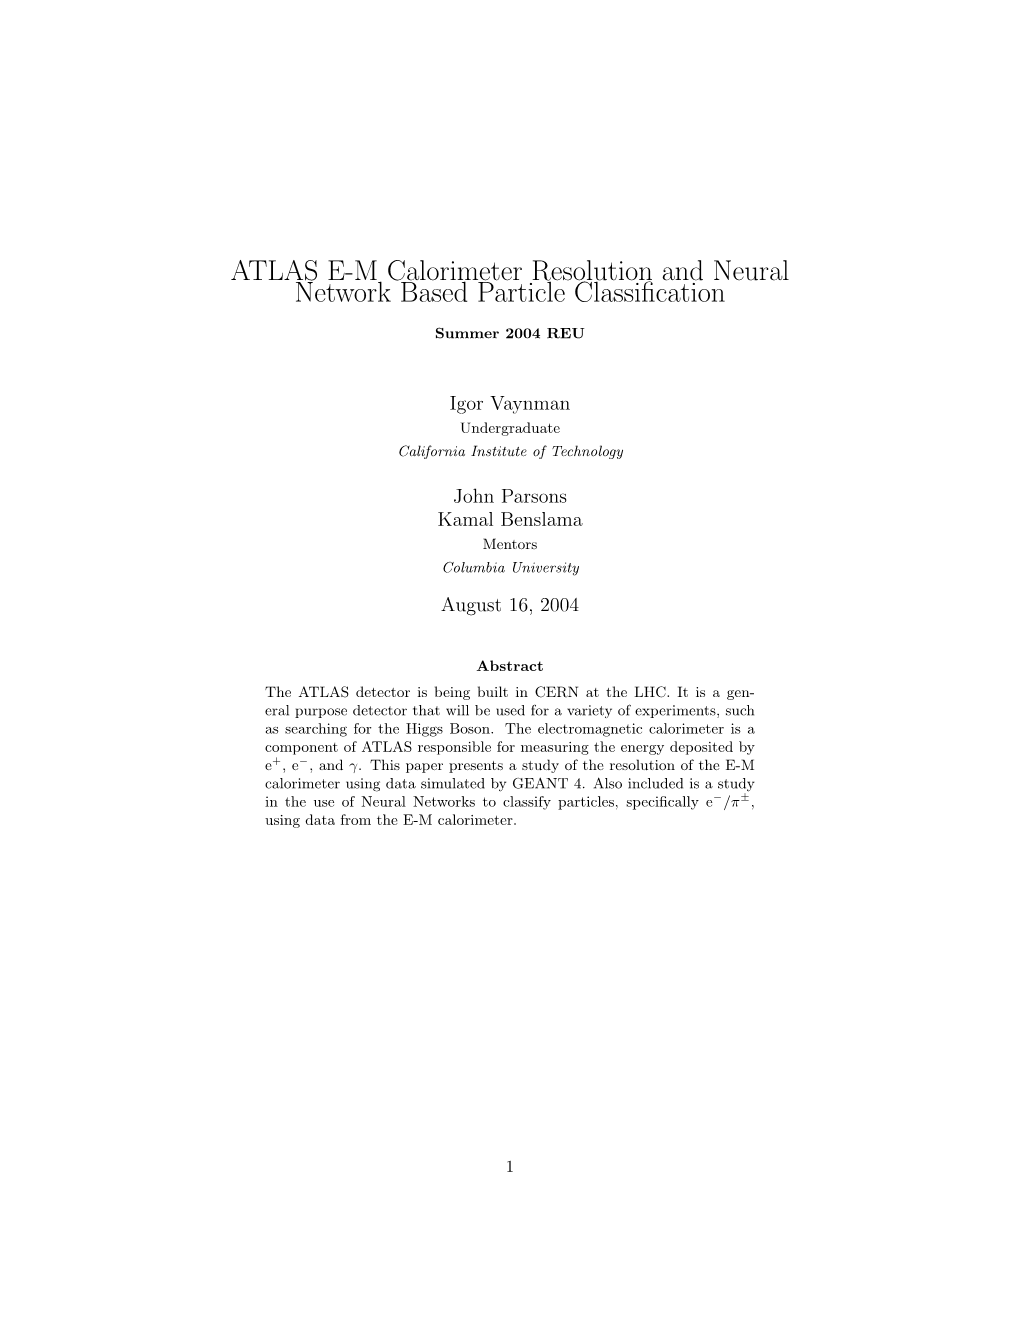 ATLAS E-M Calorimeter Resolution and Neural Network Based Particle Classiﬁcation